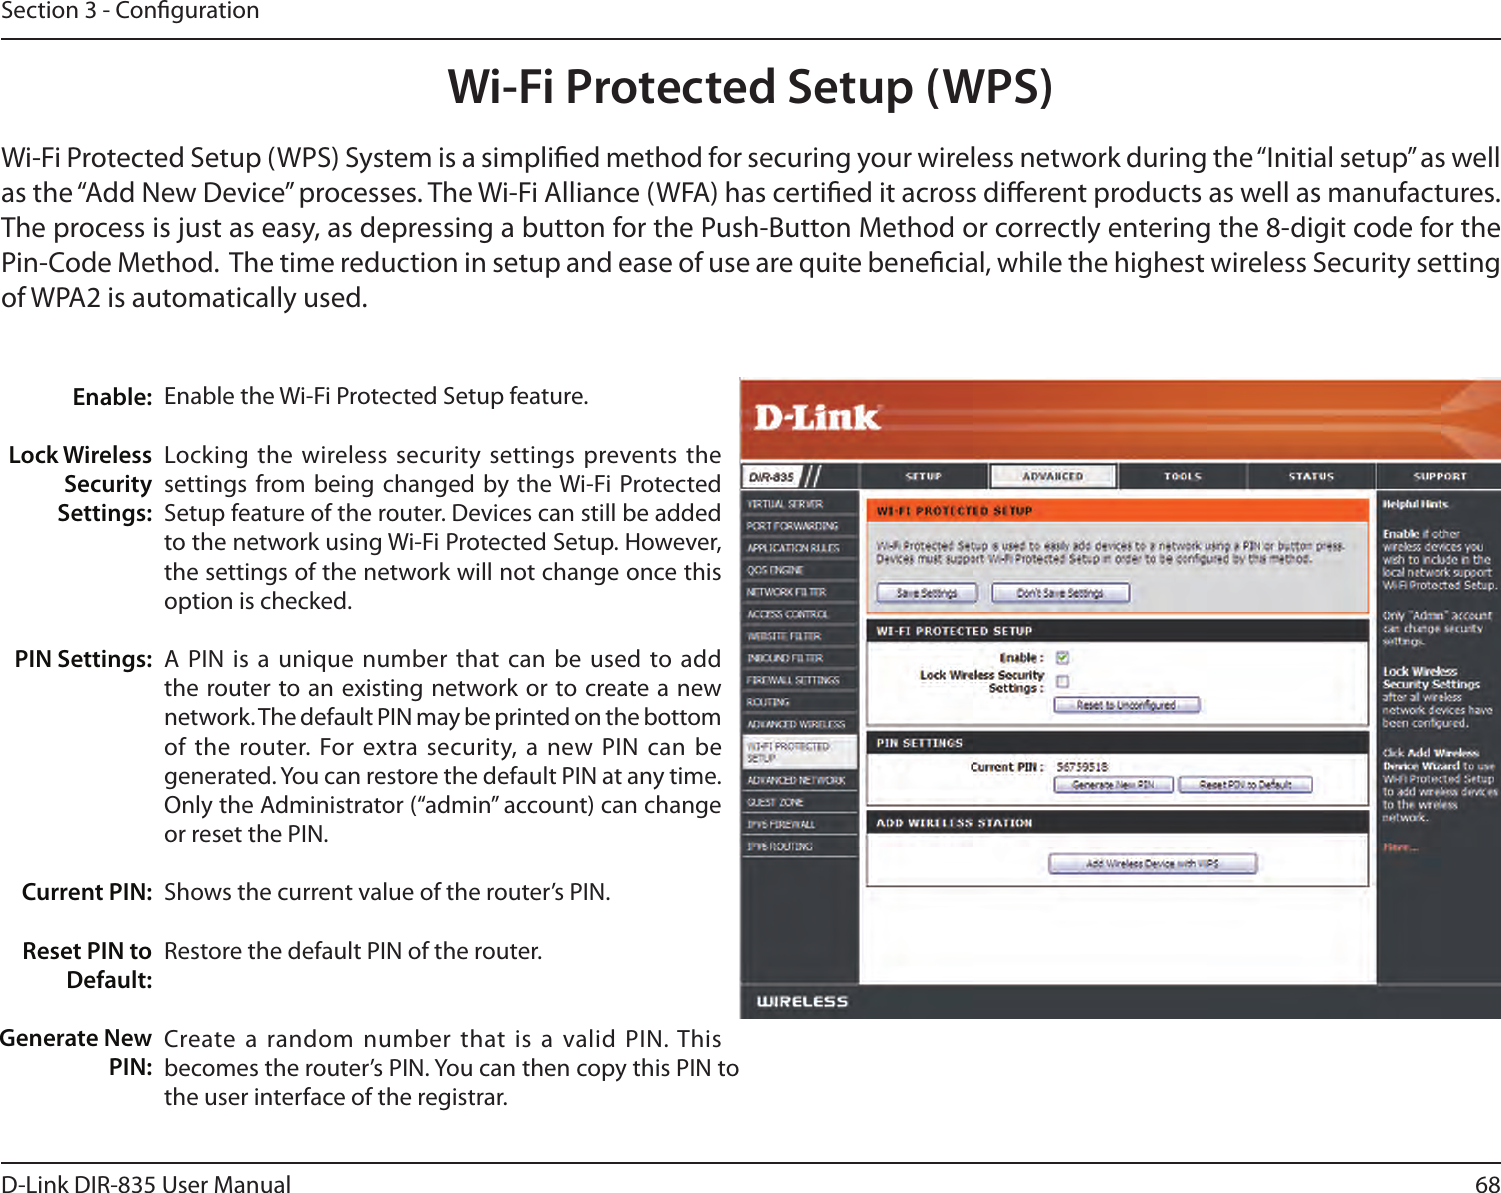 68D-Link DIR-835 User ManualSection 3 - CongurationWi-Fi Protected Setup (WPS)Enable the Wi-Fi Protected Setup feature. Locking the  wireless security settings prevents the settings from being  changed by the Wi-Fi Protected Setup feature of the router. Devices can still be added to the network using Wi-Fi Protected Setup. However, the settings of the network will not change once this option is checked.A PIN  is a  unique number that  can be  used to add the router to an existing network or to create a new network. The default PIN may be printed on the bottom of the  router.  For extra security, a  new PIN can  be generated. You can restore the default PIN at any time. Only the Administrator (“admin” account) can change or reset the PIN. Shows the current value of the router’s PIN. Restore the default PIN of the router. Create a  random number  that is  a valid PIN. This becomes the router’s PIN. You can then copy this PIN to the user interface of the registrar.Enable:Lock Wireless Security Settings:PIN Settings:Current PIN:Reset PIN to Default:Generate New PIN:Wi-Fi Protected Setup (WPS) System is a simplied method for securing your wireless network during the “Initial setup” as well as the “Add New Device” processes. The Wi-Fi Alliance (WFA) has certied it across dierent products as well as manufactures. The process is just as easy, as depressing a button for the Push-Button Method or correctly entering the 8-digit code for the Pin-Code Method.  The time reduction in setup and ease of use are quite benecial, while the highest wireless Security setting of WPA2 is automatically used.